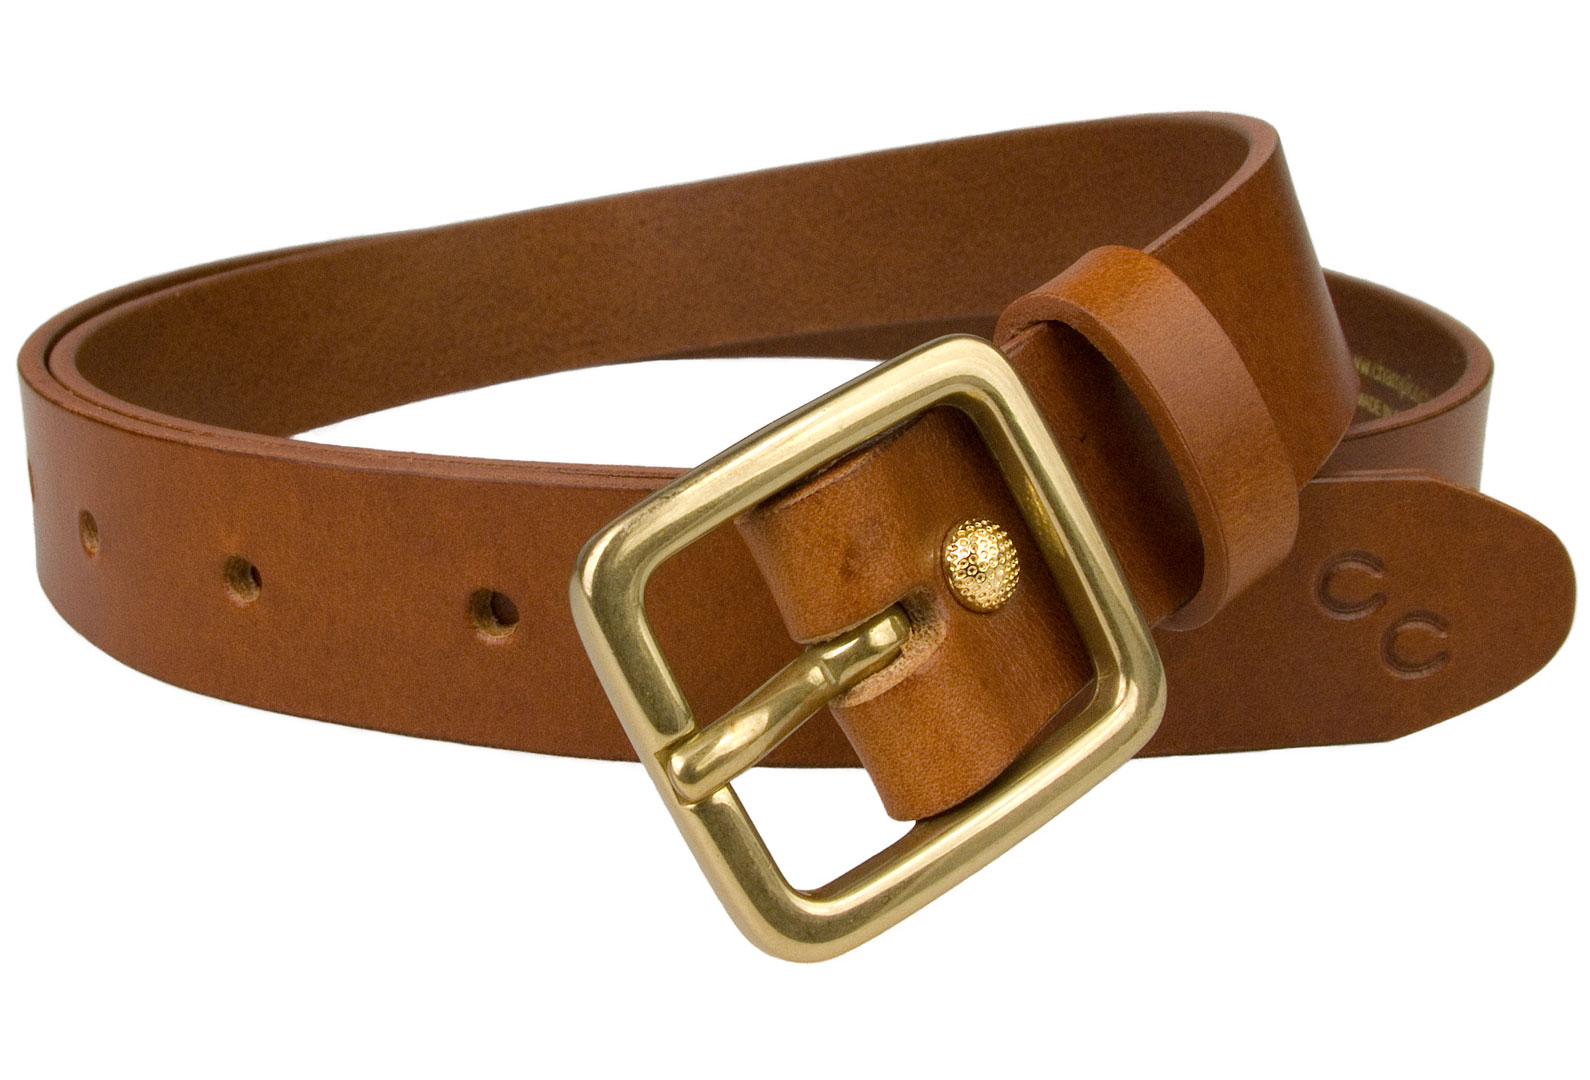 https://championchase.com/wp-content/uploads/2019/09/Womens-Tan-Leather-Belt-Solid-Brass-Buckle-1-inch-Wide.jpg